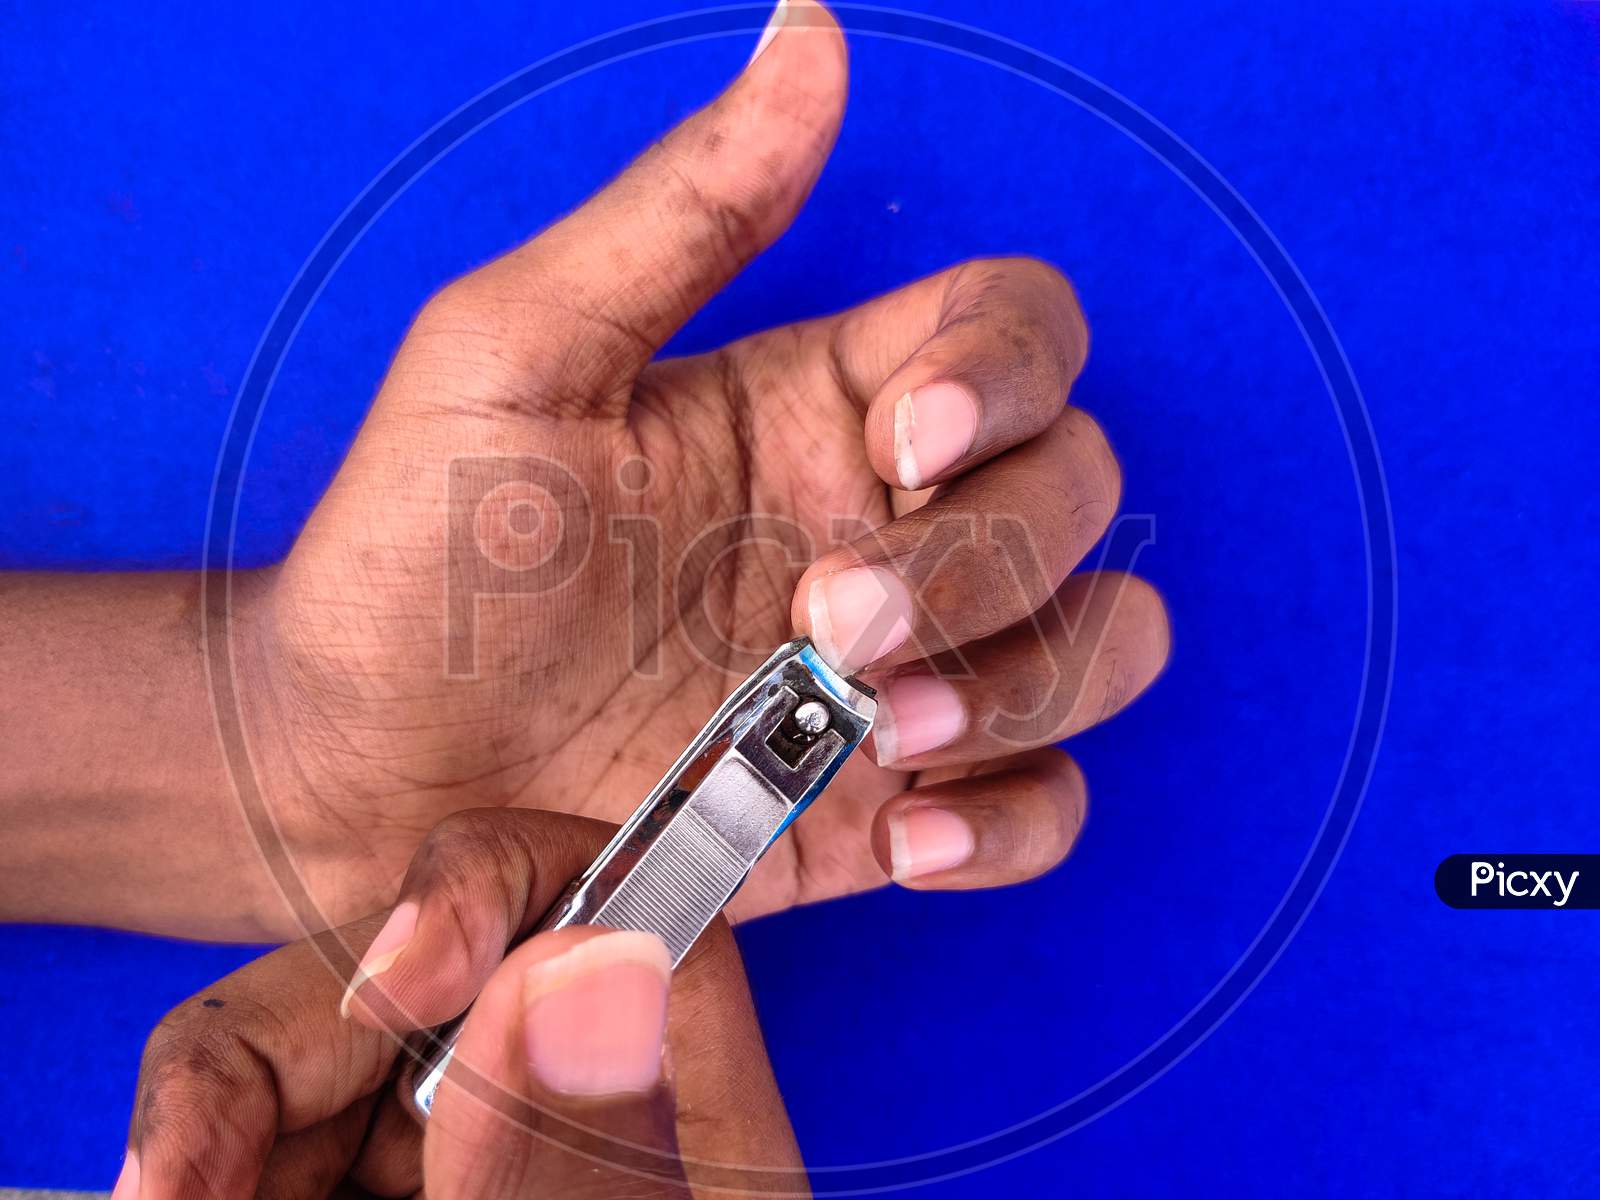 Close Up Of Man Cutting His Left Hand Finger Nails. Isolated On Blue Background.